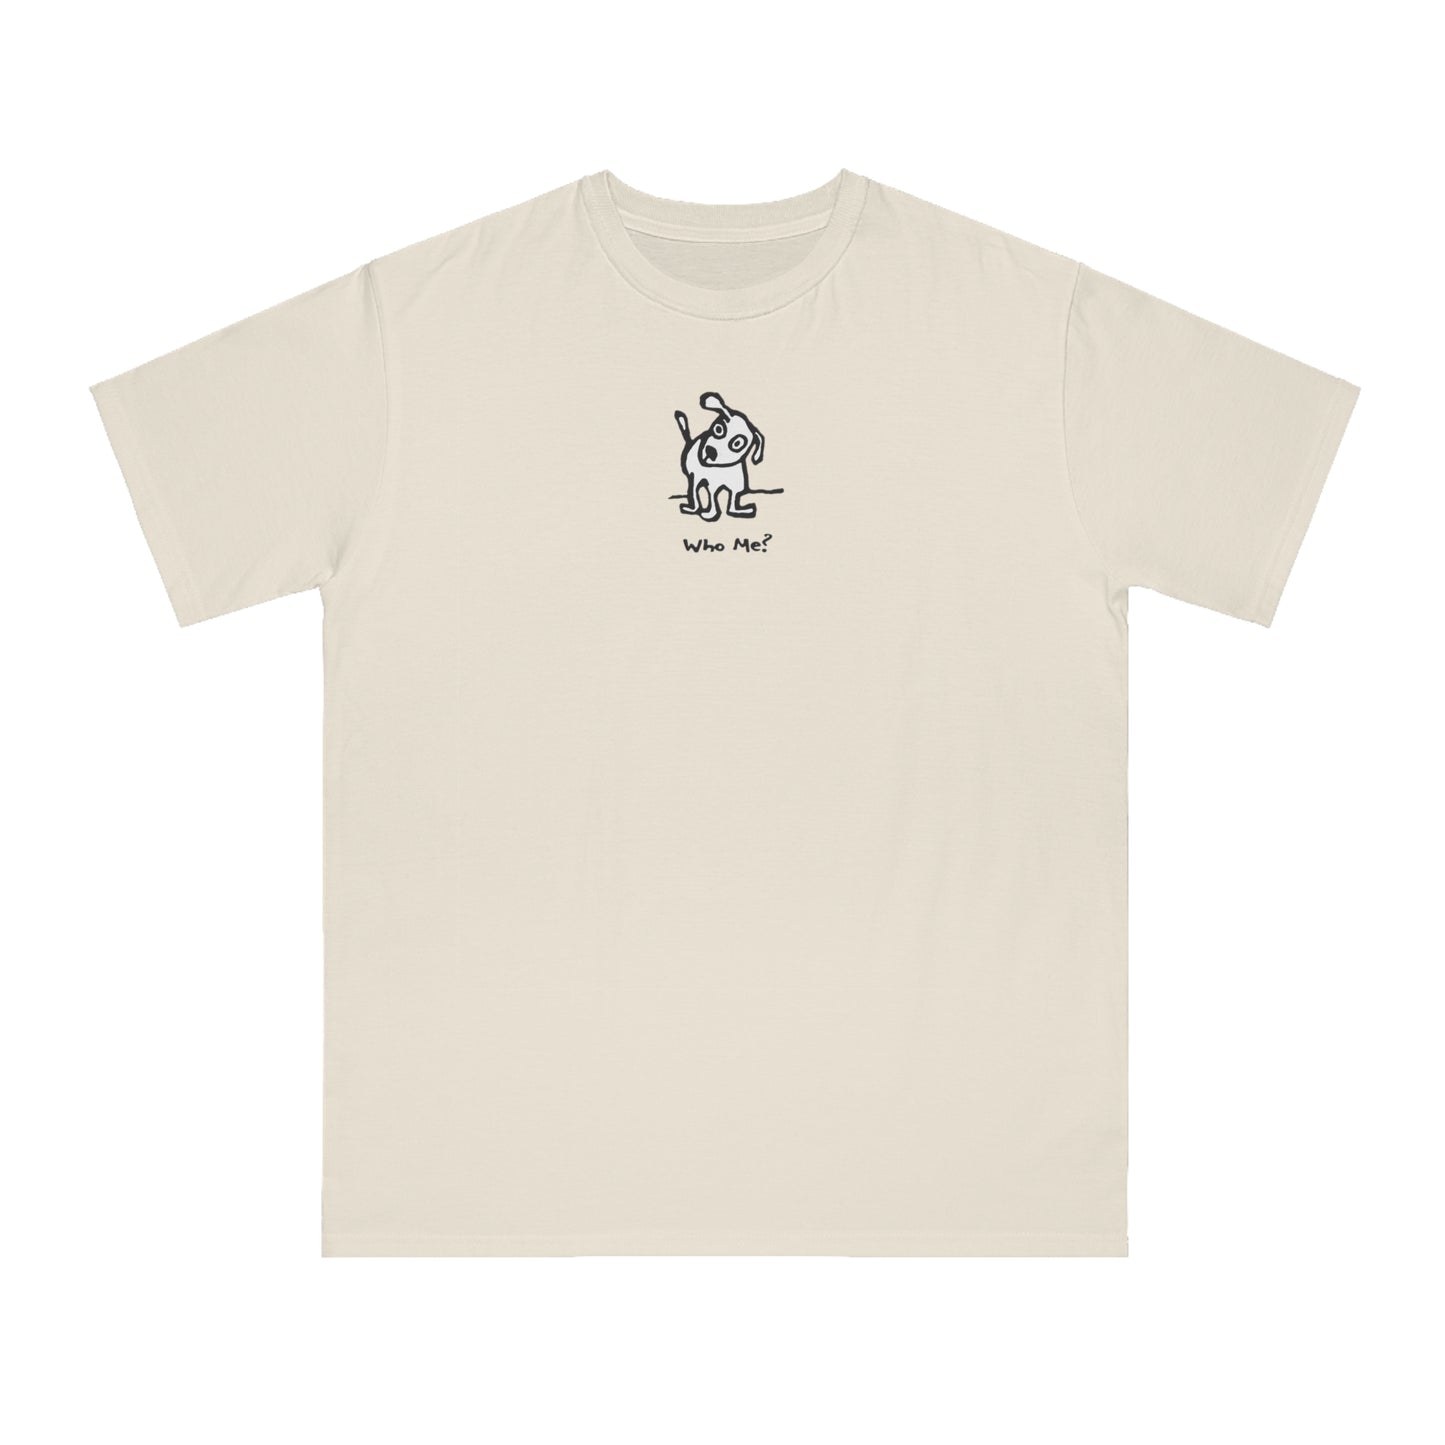 White dog with head cocked to one side on dolphin blue tinted unisex men's t-shirt. Text under image reads Who Me